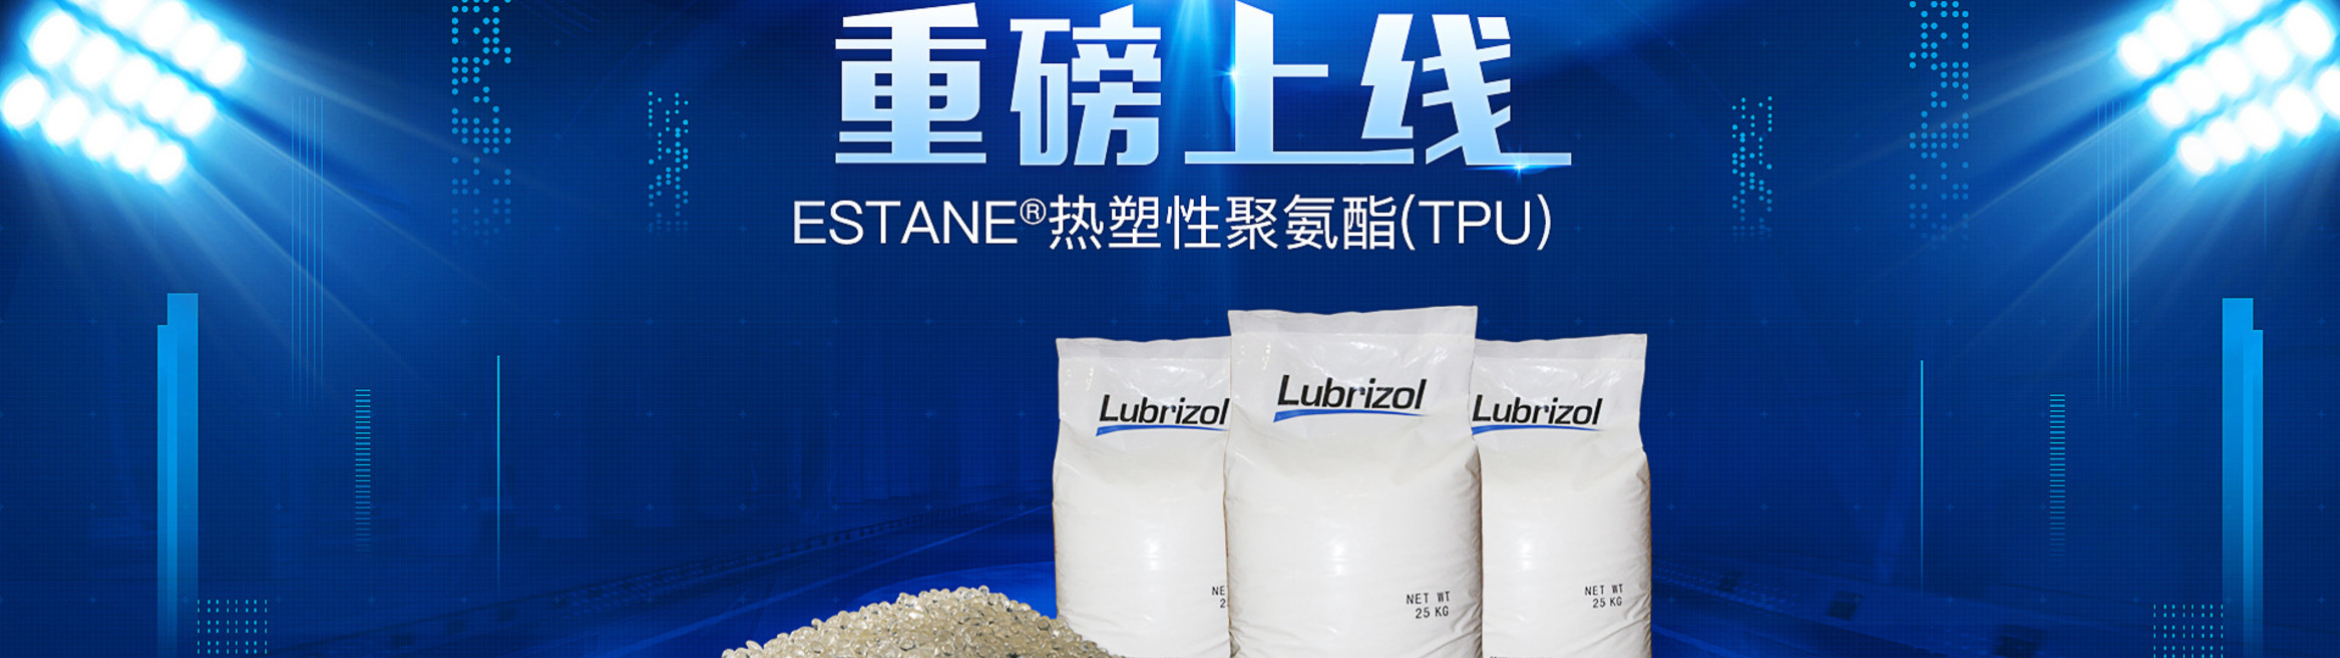 ESTANE® TPU is Now Available for Online Purchase in China